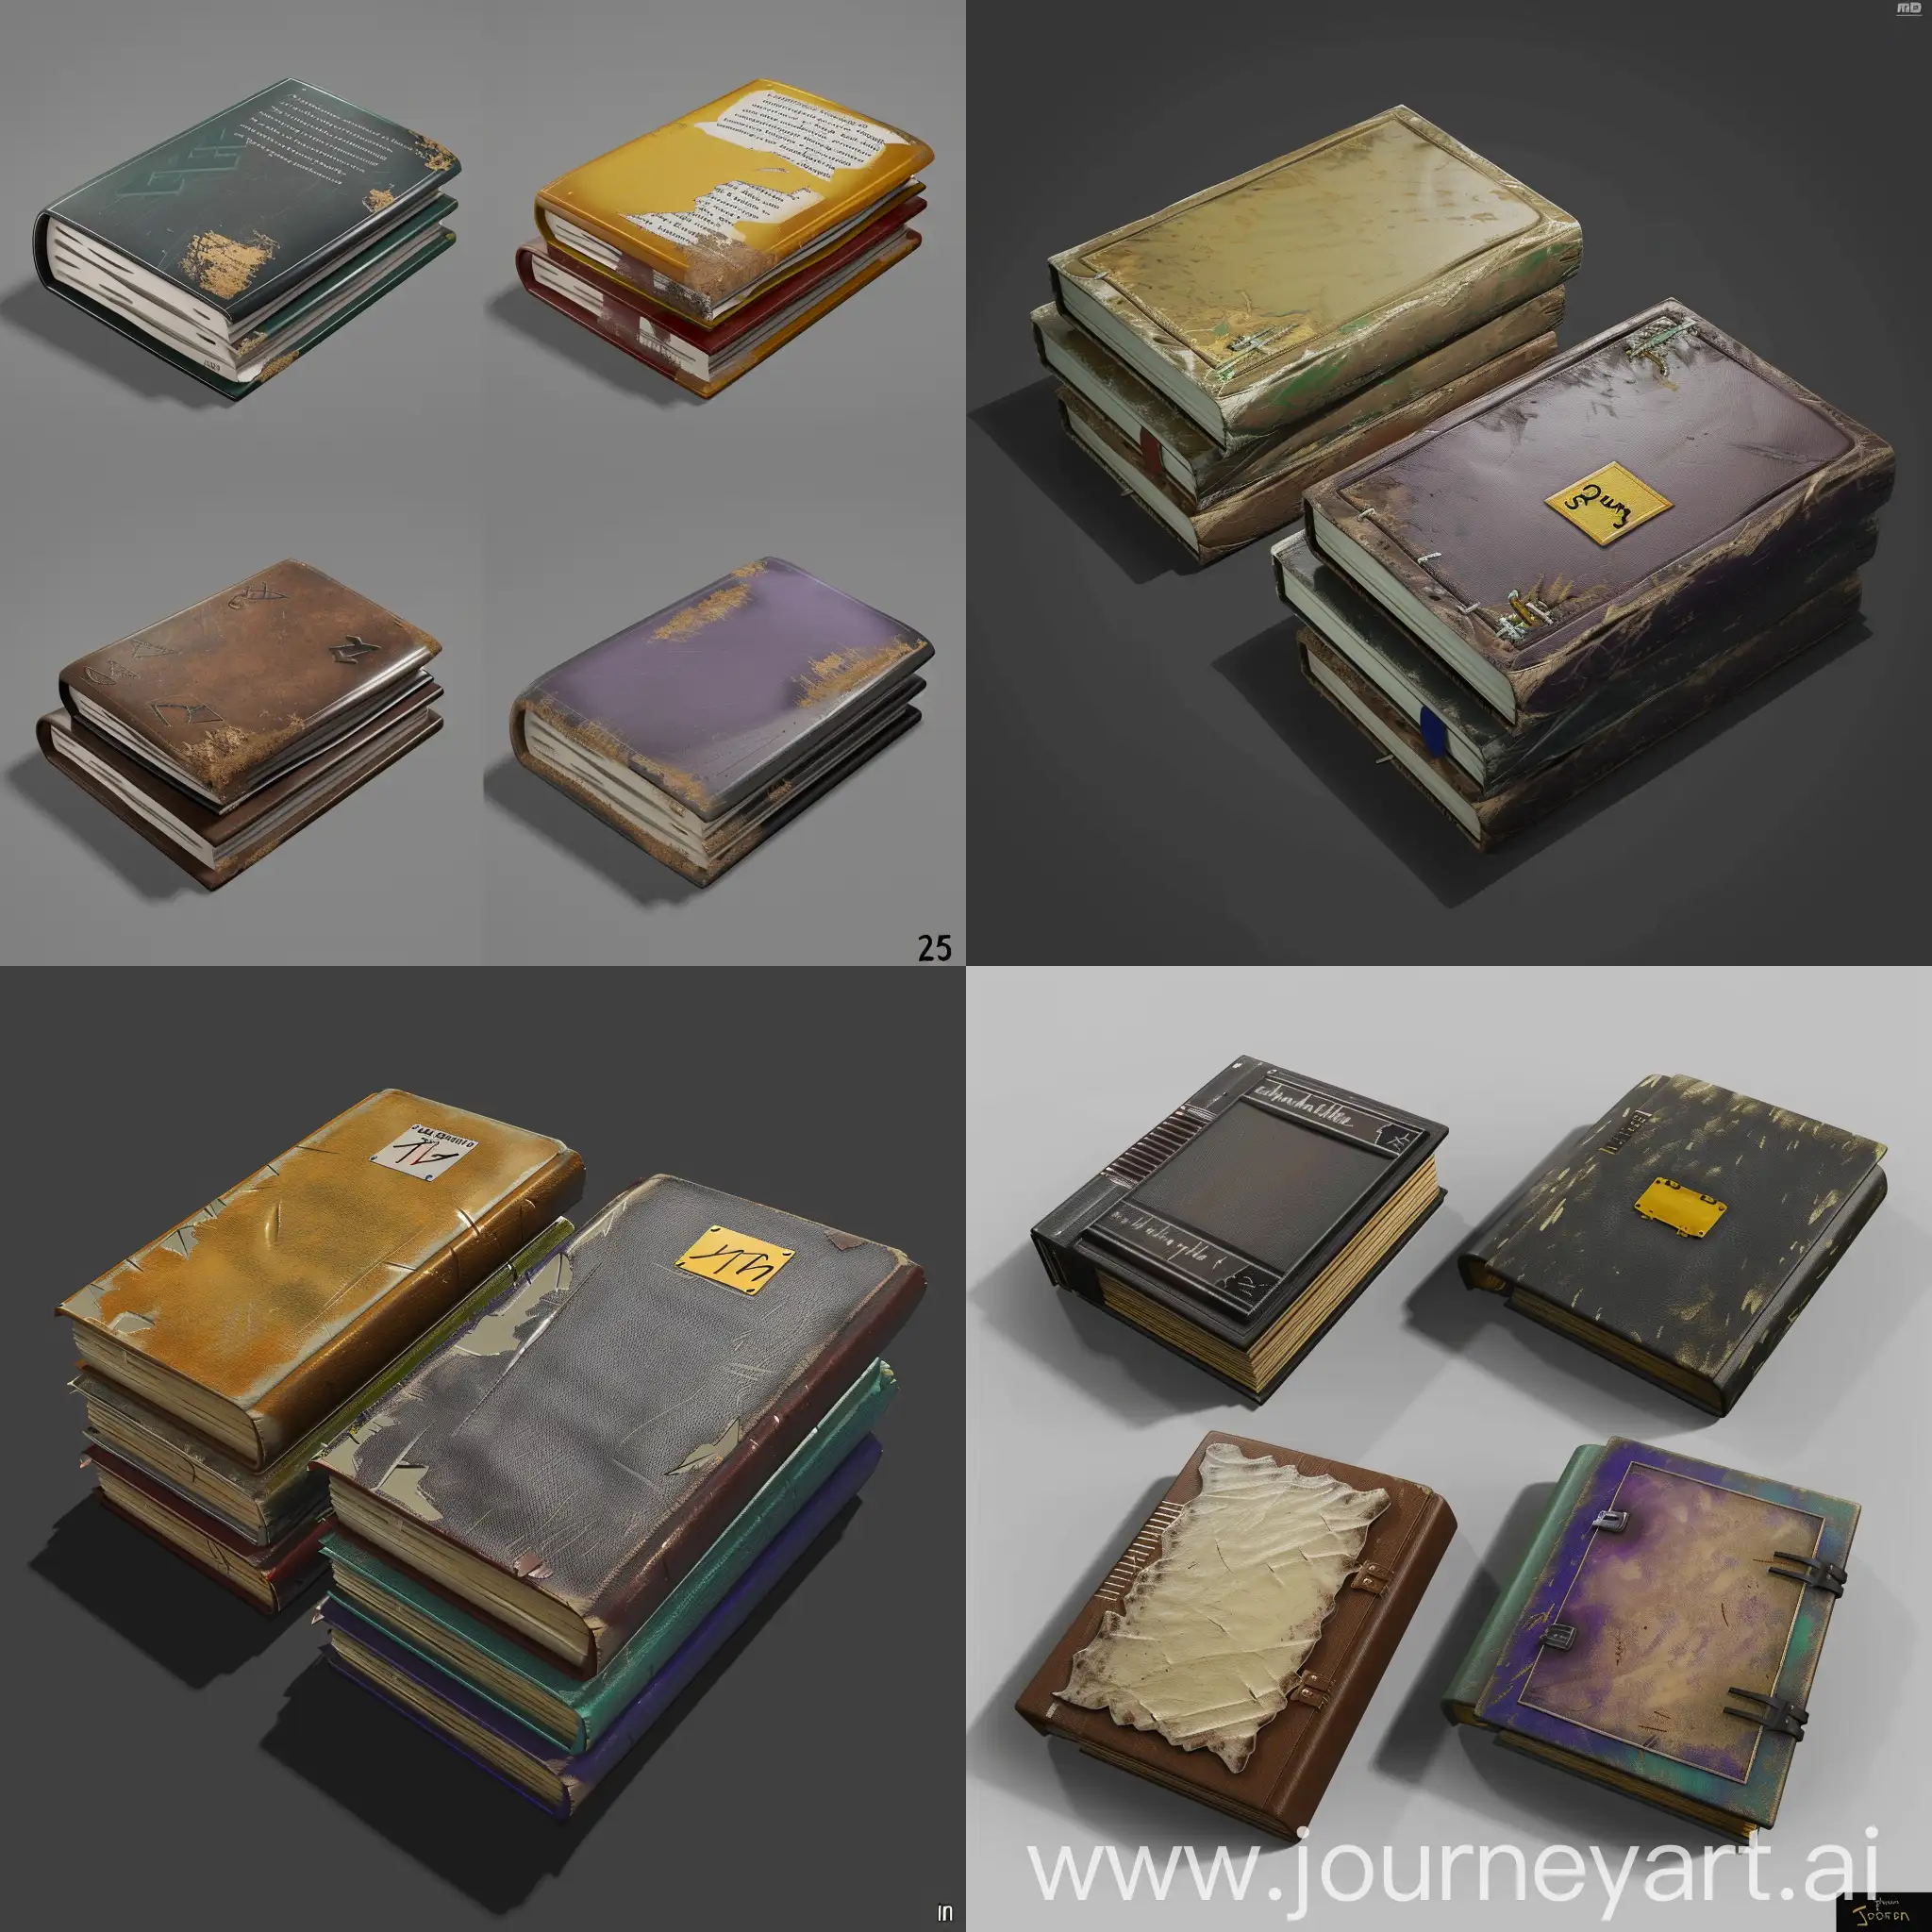 https://imgbly.com/ib/NhVu9noHmK.jpg realistic worn very thin books without text in style of realistic 3d blender game asset, leather cover, realistic style